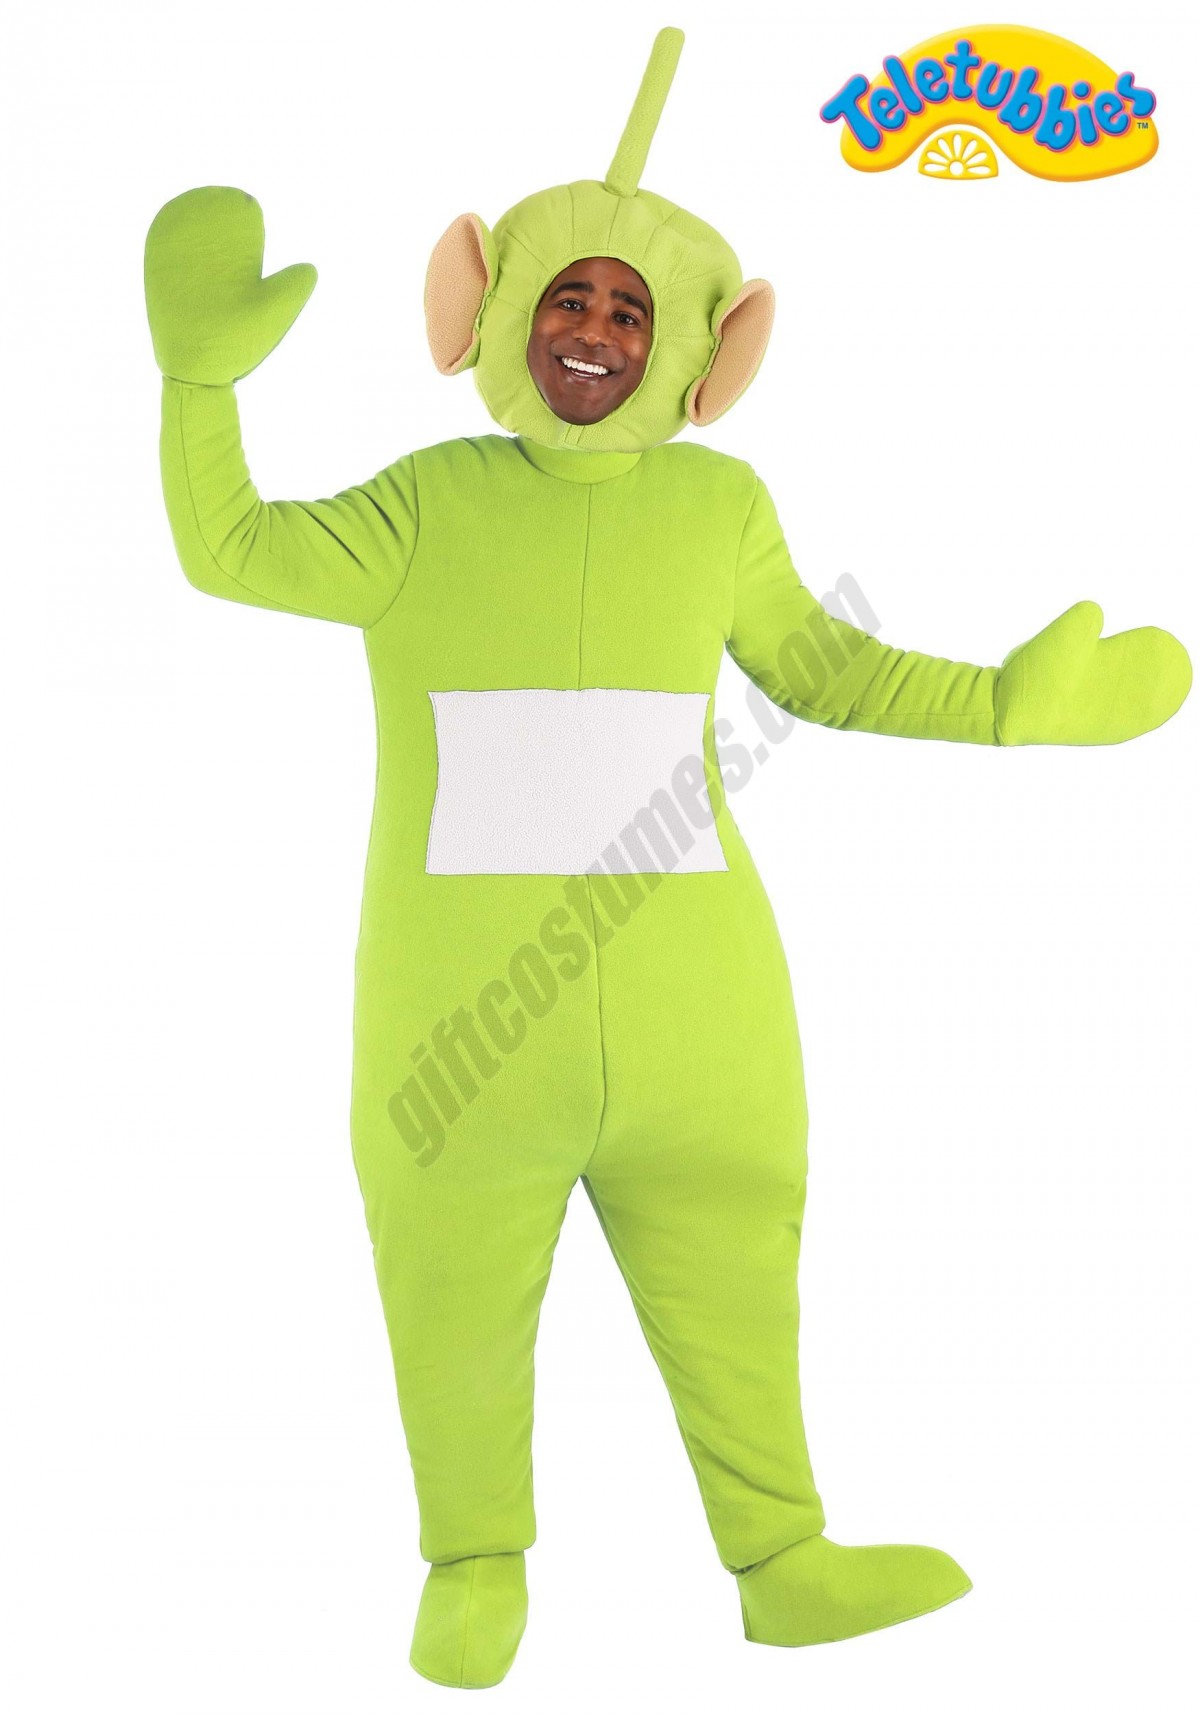 Teletubbies Dipsy Costume for Adults Promotions - -0